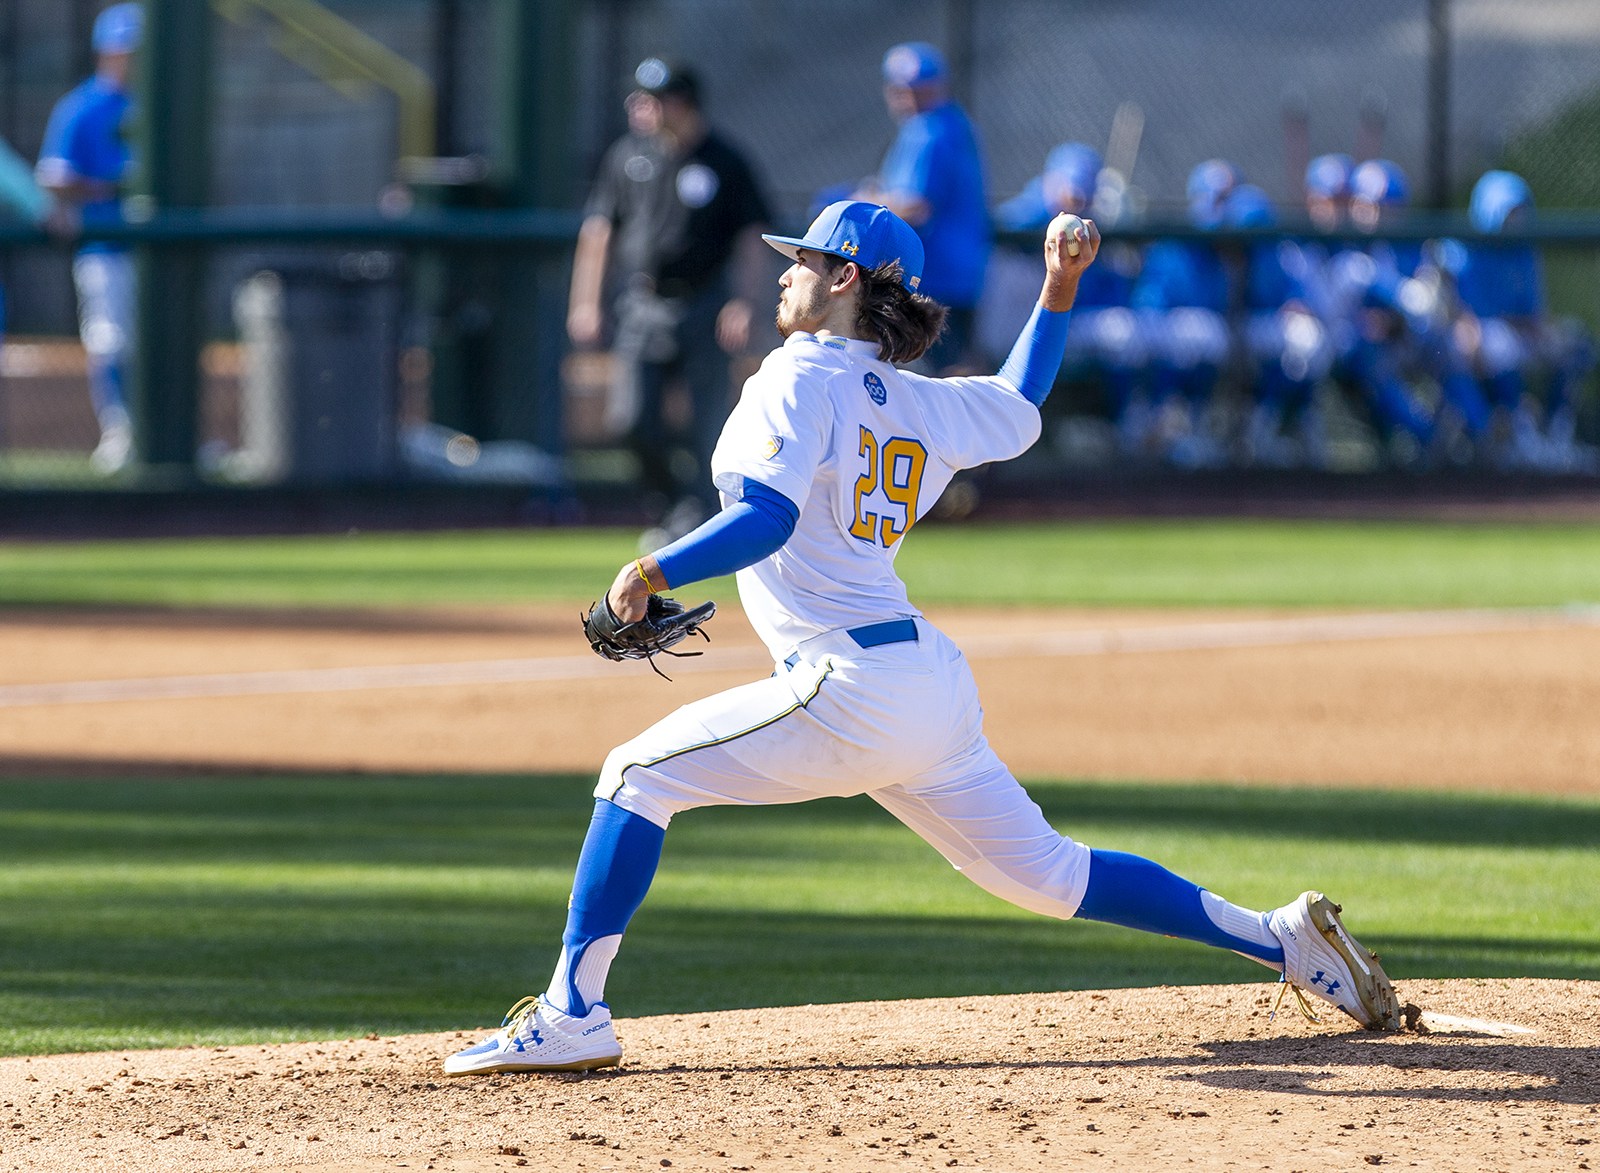 UCLA baseball to hit the road again against UCSB after winning weekend